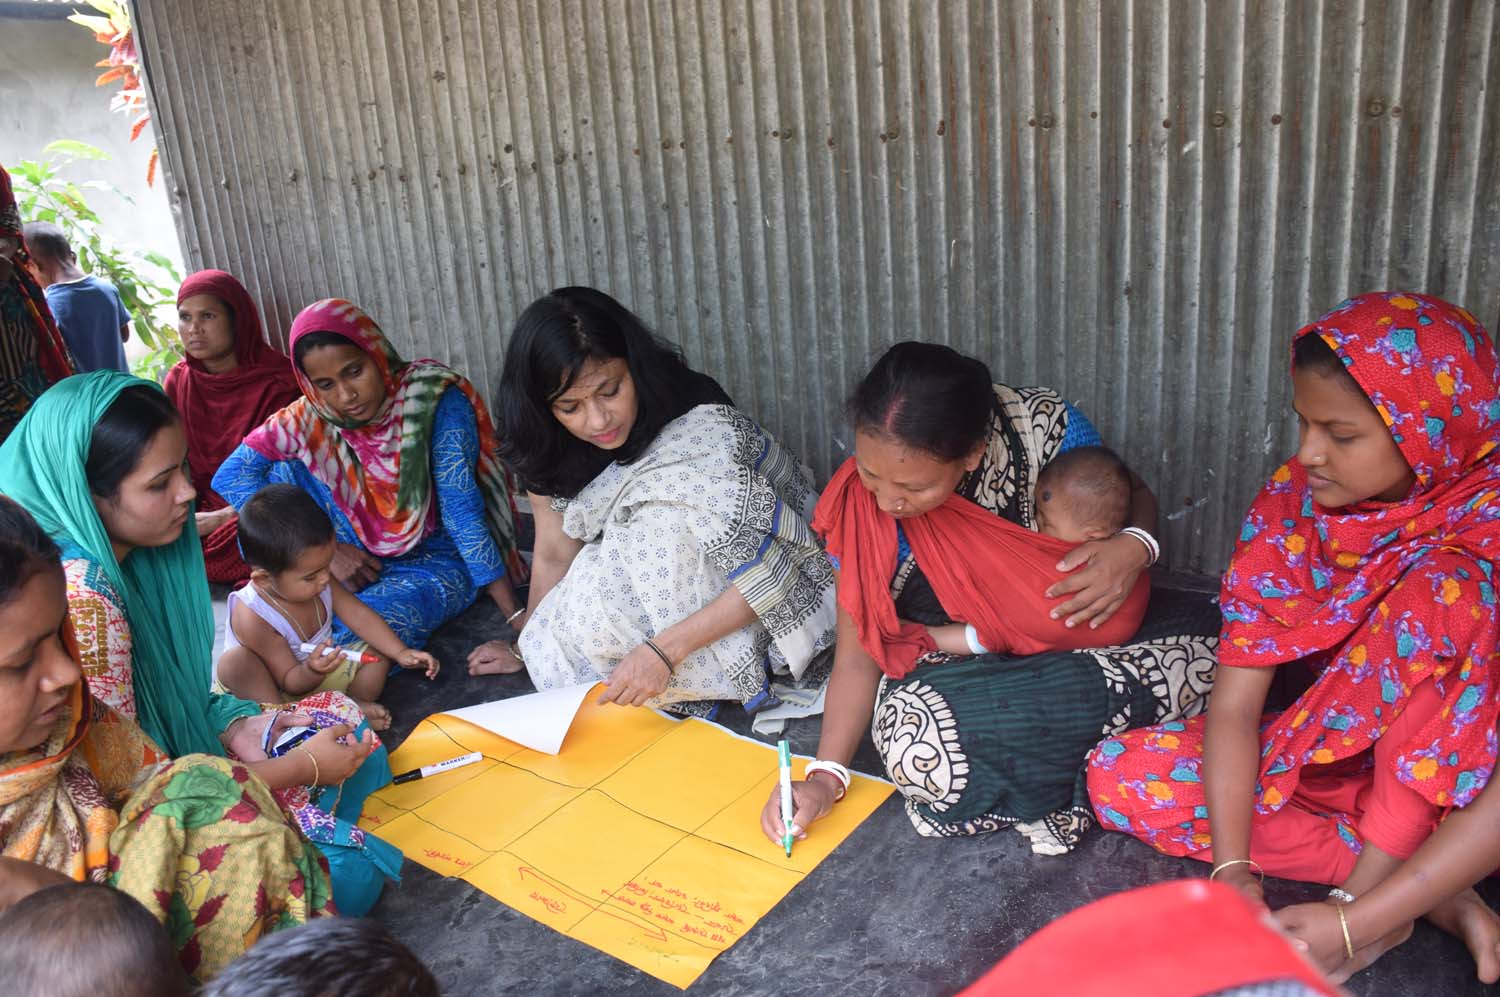 Women in a discussion group about health services for women and children